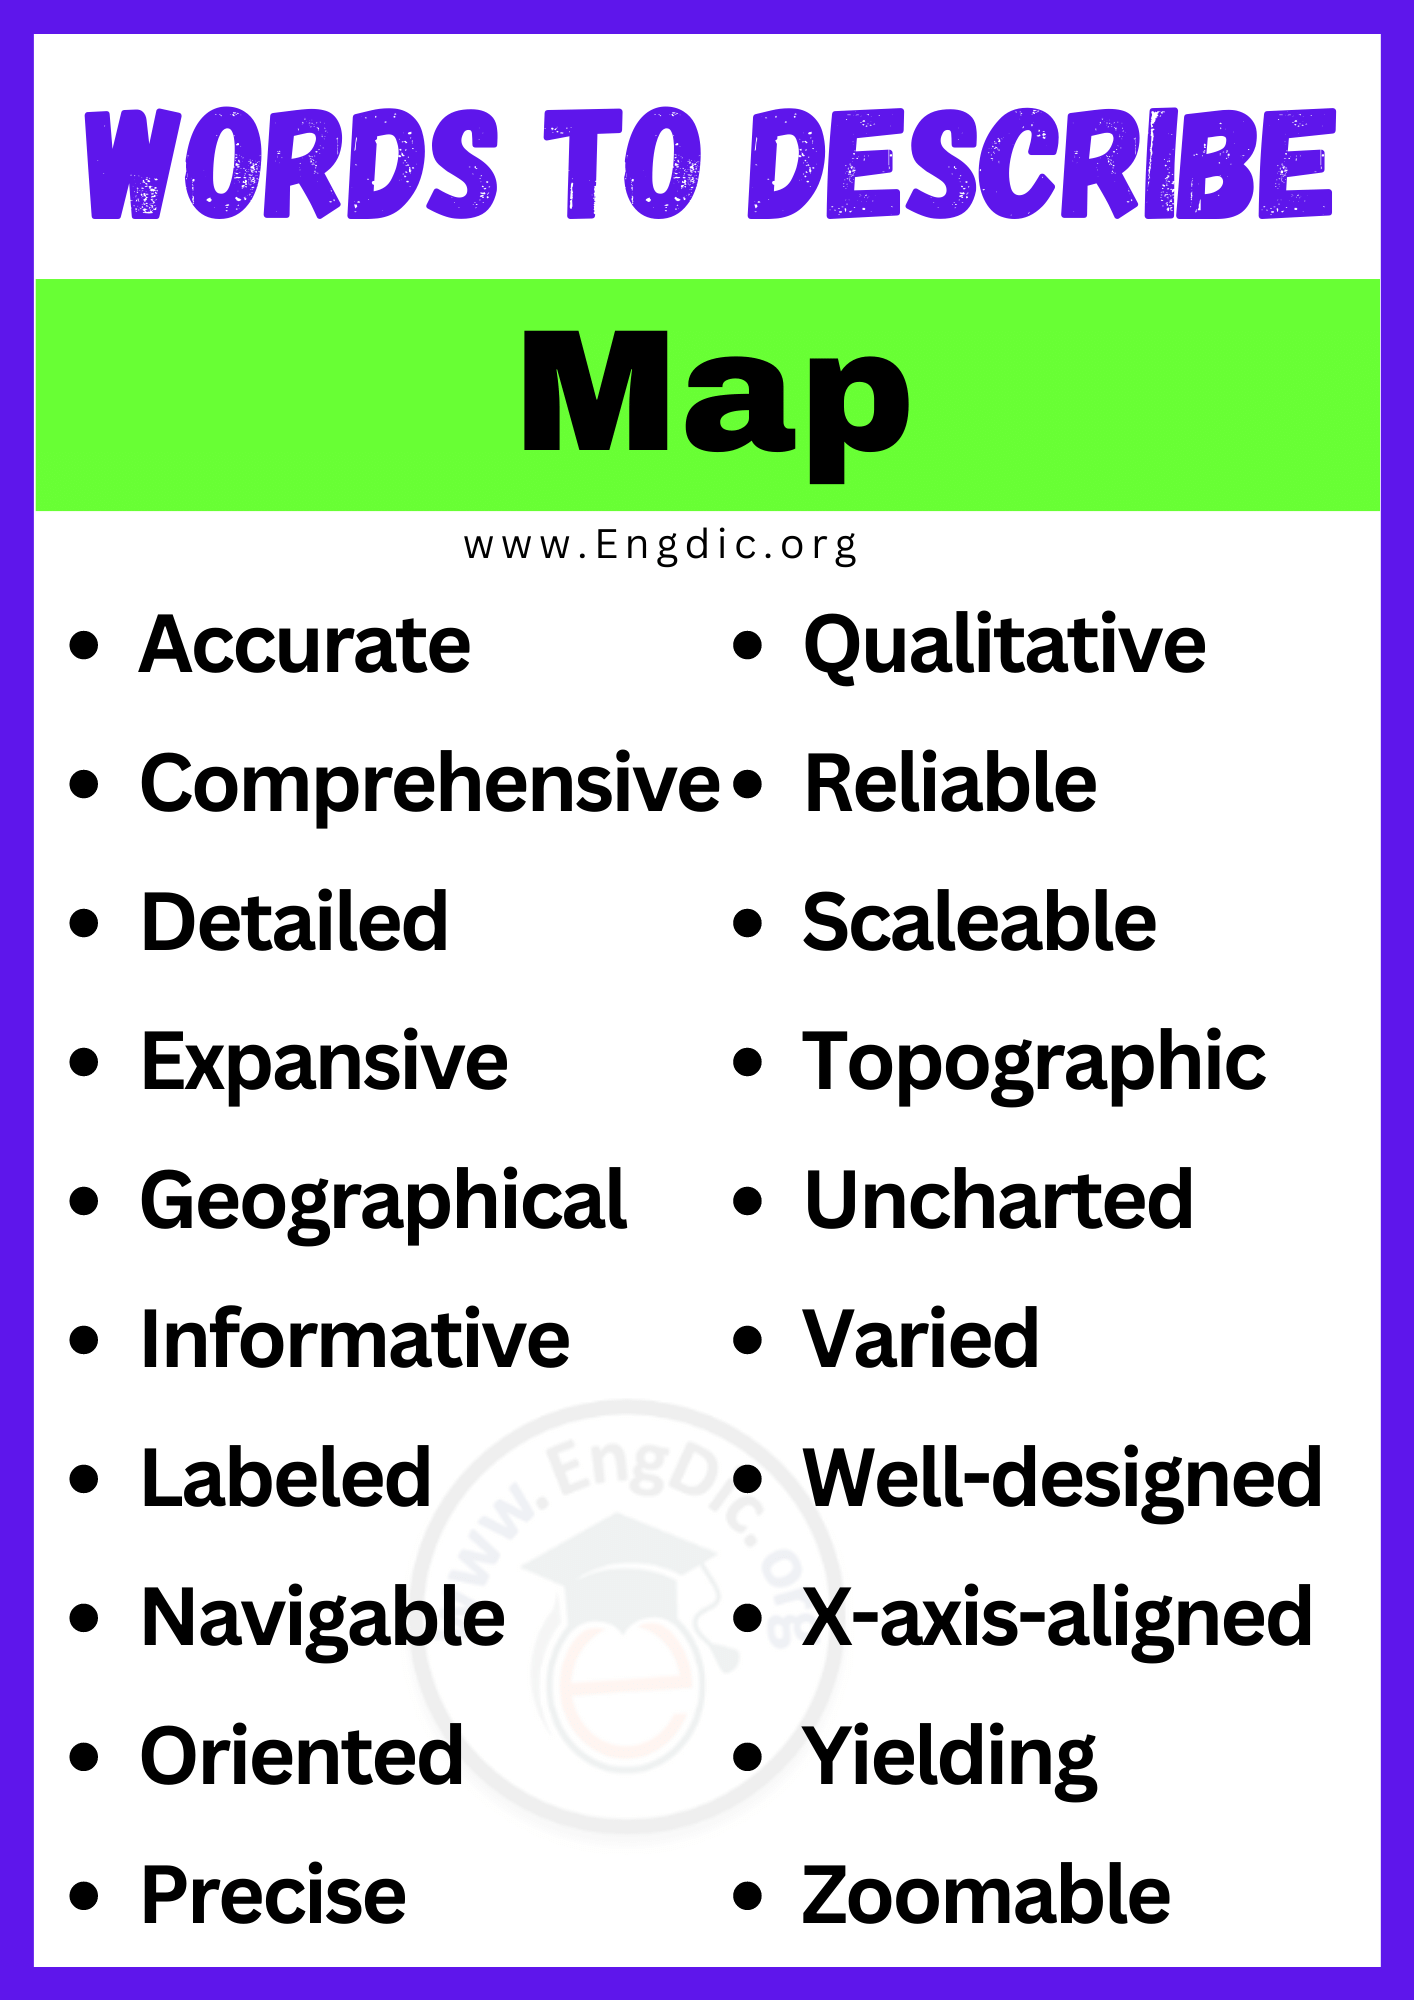 Words to Describe Map